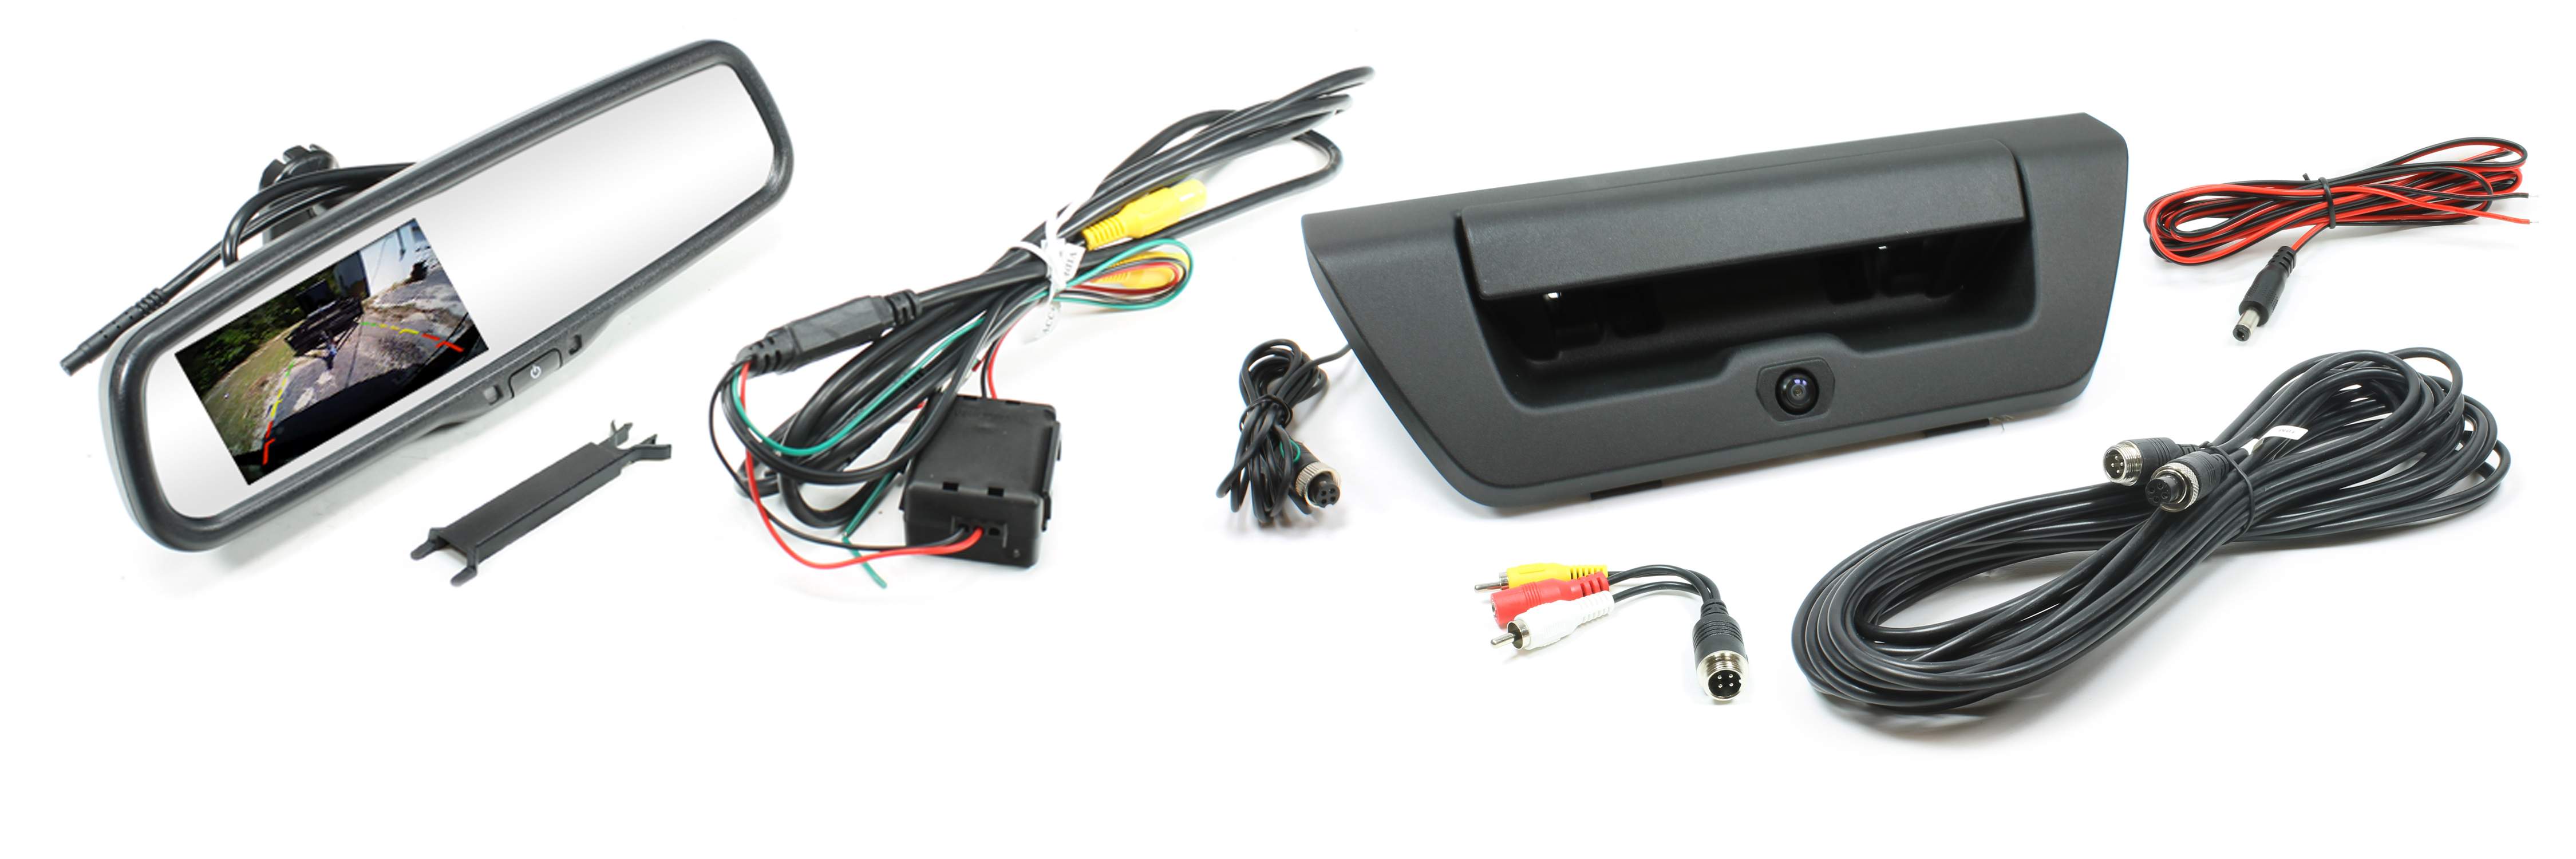 2015-2020 Ford F150 tailgate handle camera with video module for 4.2-inch screens